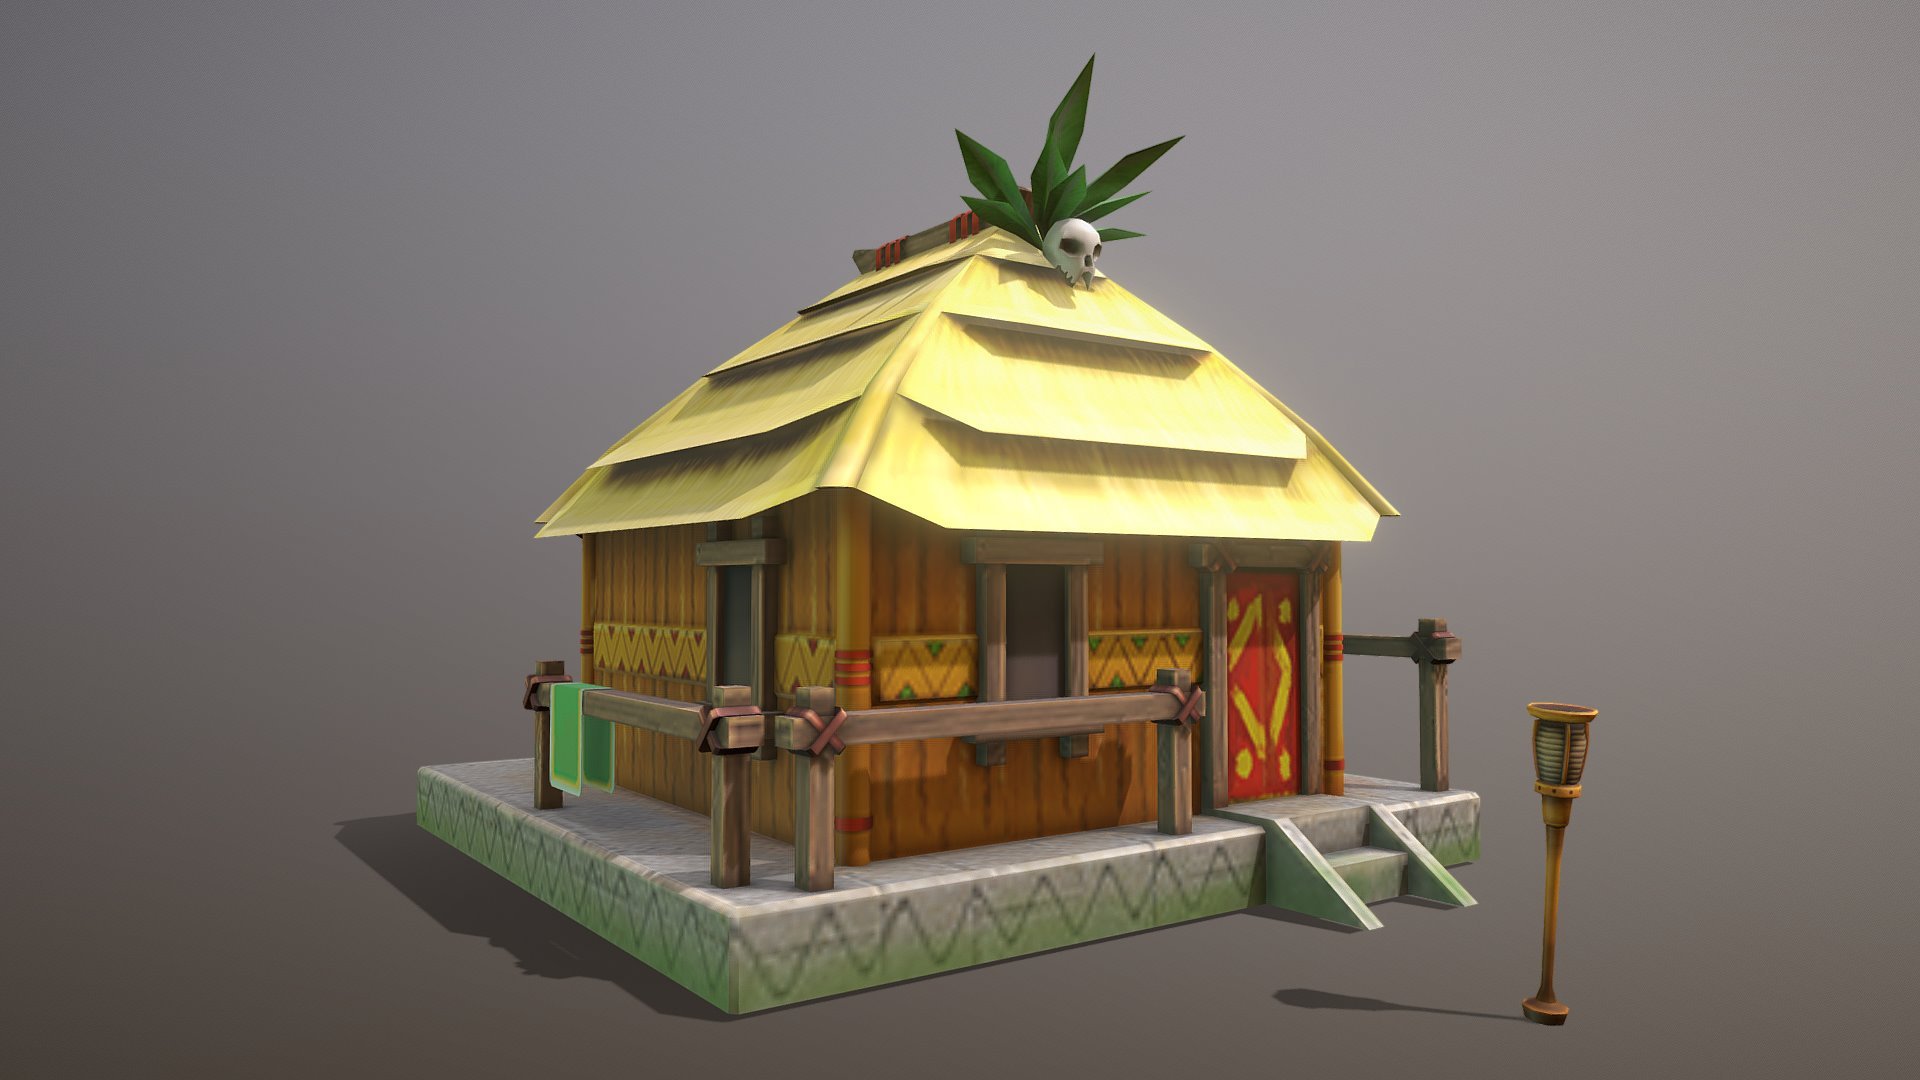 PirateCollection_MayaHut

All Objects - (triangles 3132) / (points 1989)

Low-poly 3D models for game
- Hut (triangles 2756)
- Torch (triangles 376)

Textures  diffuse 
- PirateCollection_MayaHut_Hut.png      512x512
- PirateCollection_MayaHut_Torch.png        256x256

If you have questions about my models or need any kind of help, feel free to contact me and i'll do my best to help you 3d model